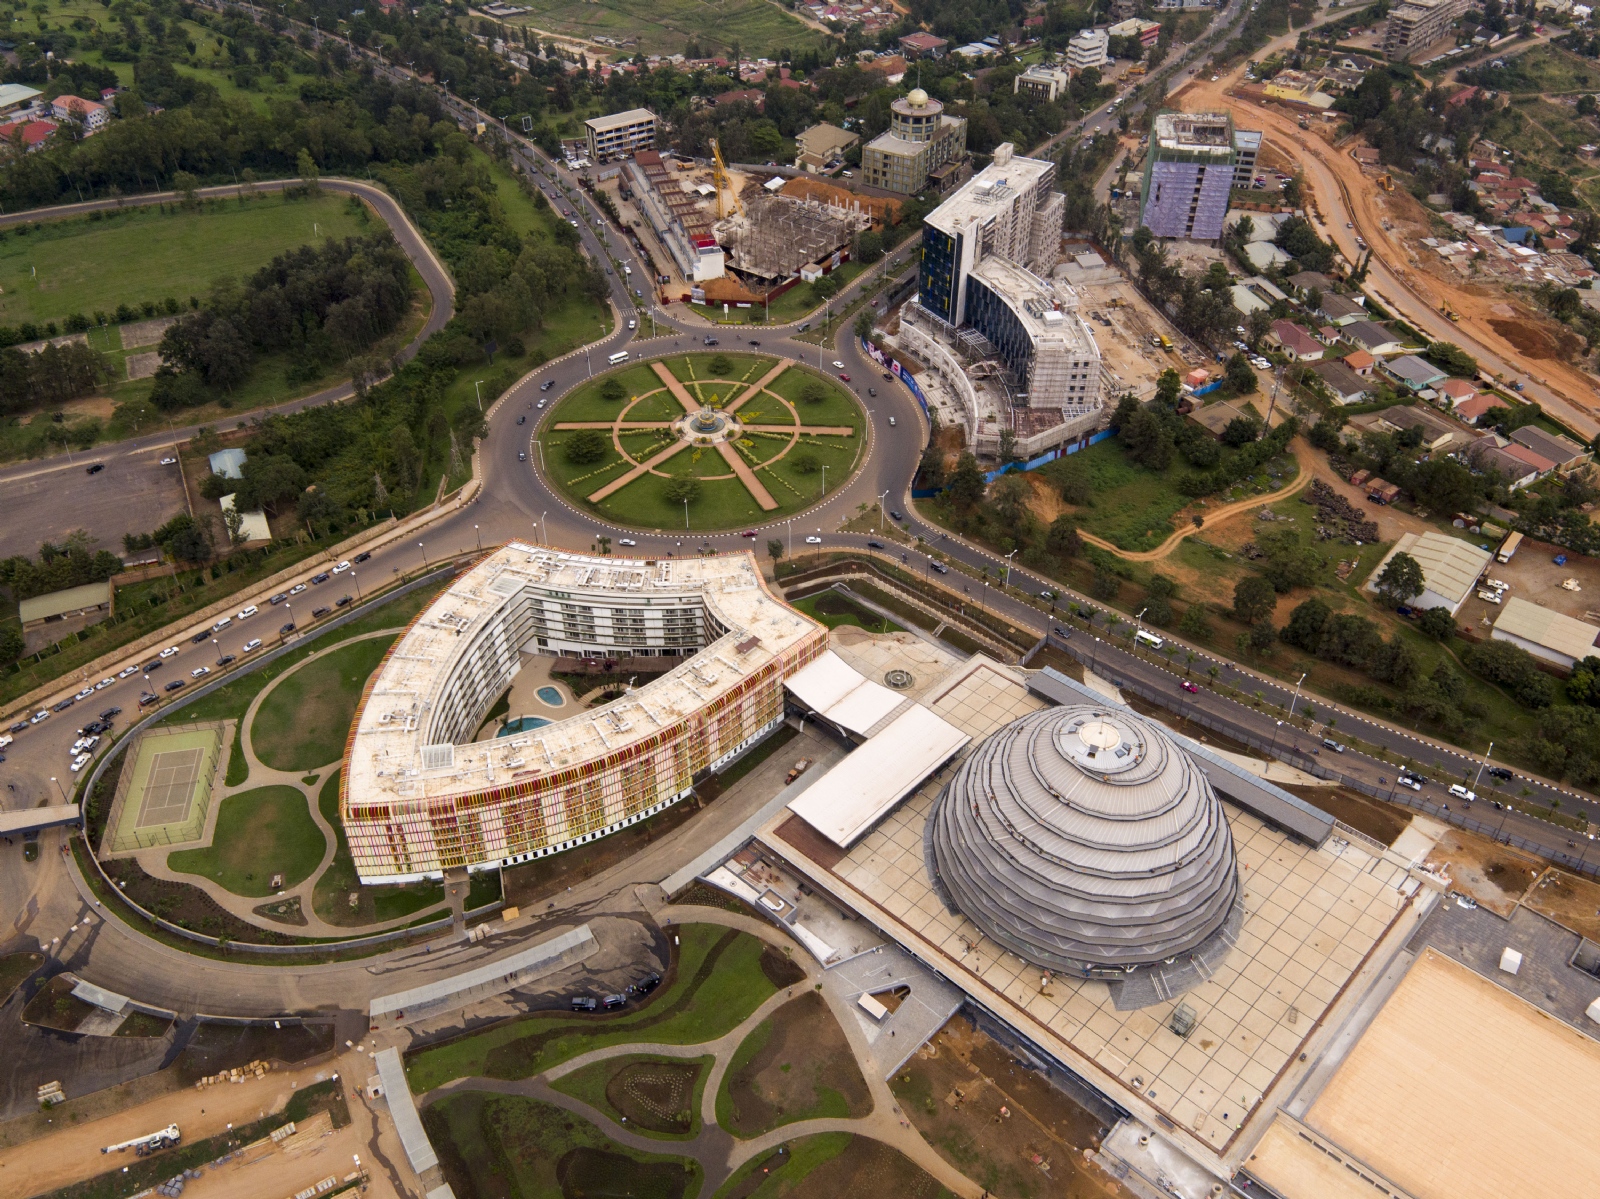 Aerial view of completed Dome structure, Hotel and environs (summa.com.tr)